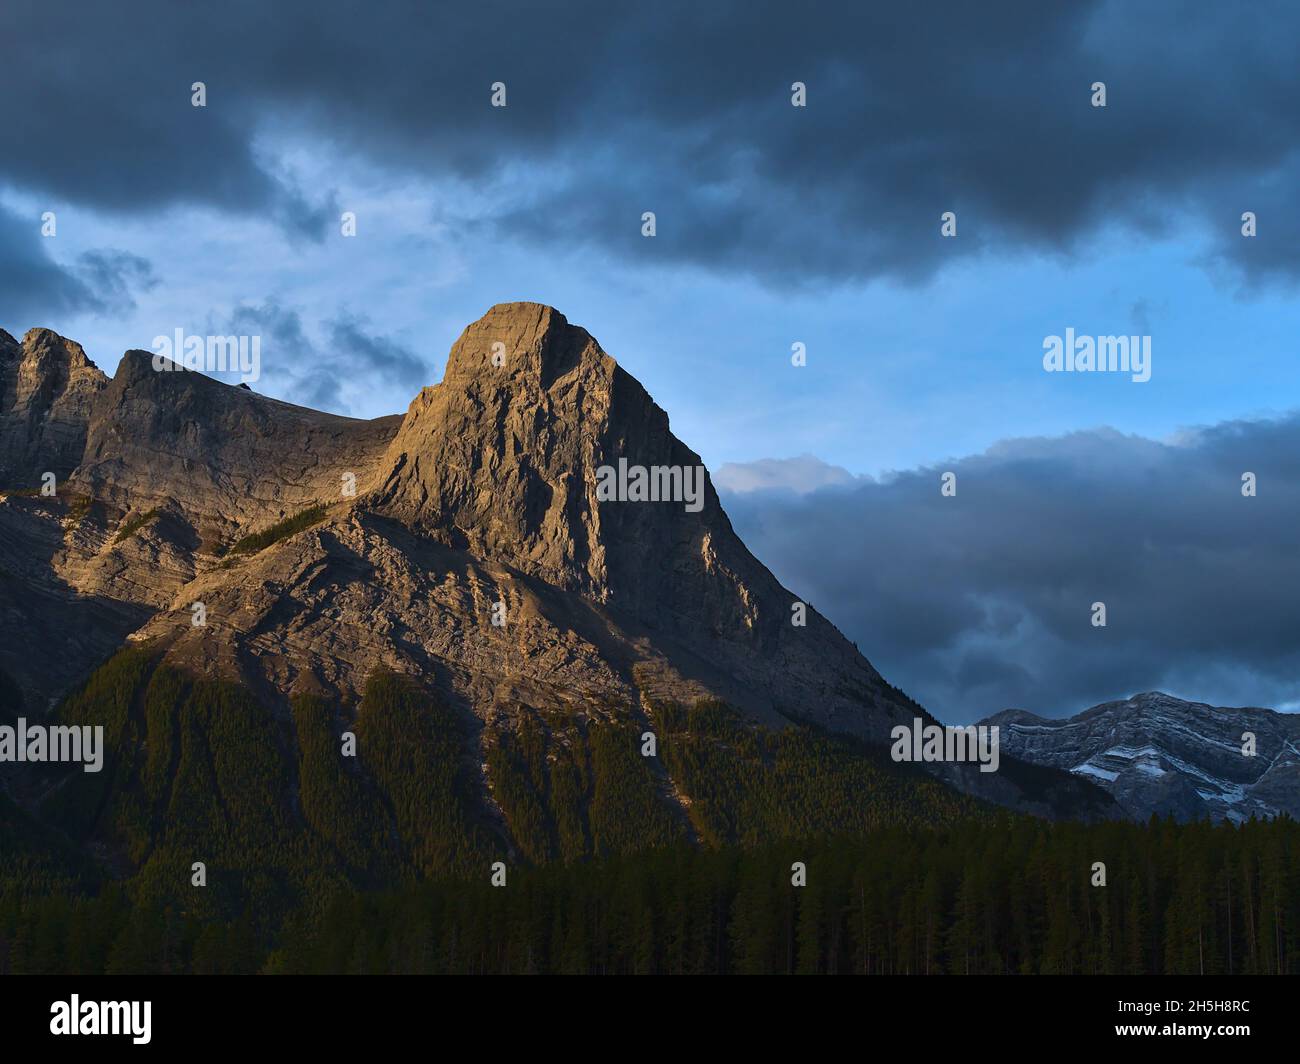 View of the top of popular hiking destination Ha Ling Peak near Canmore, Kananaskis Country, Alberta, Canada in the morning light with cloudy sky. Stock Photo